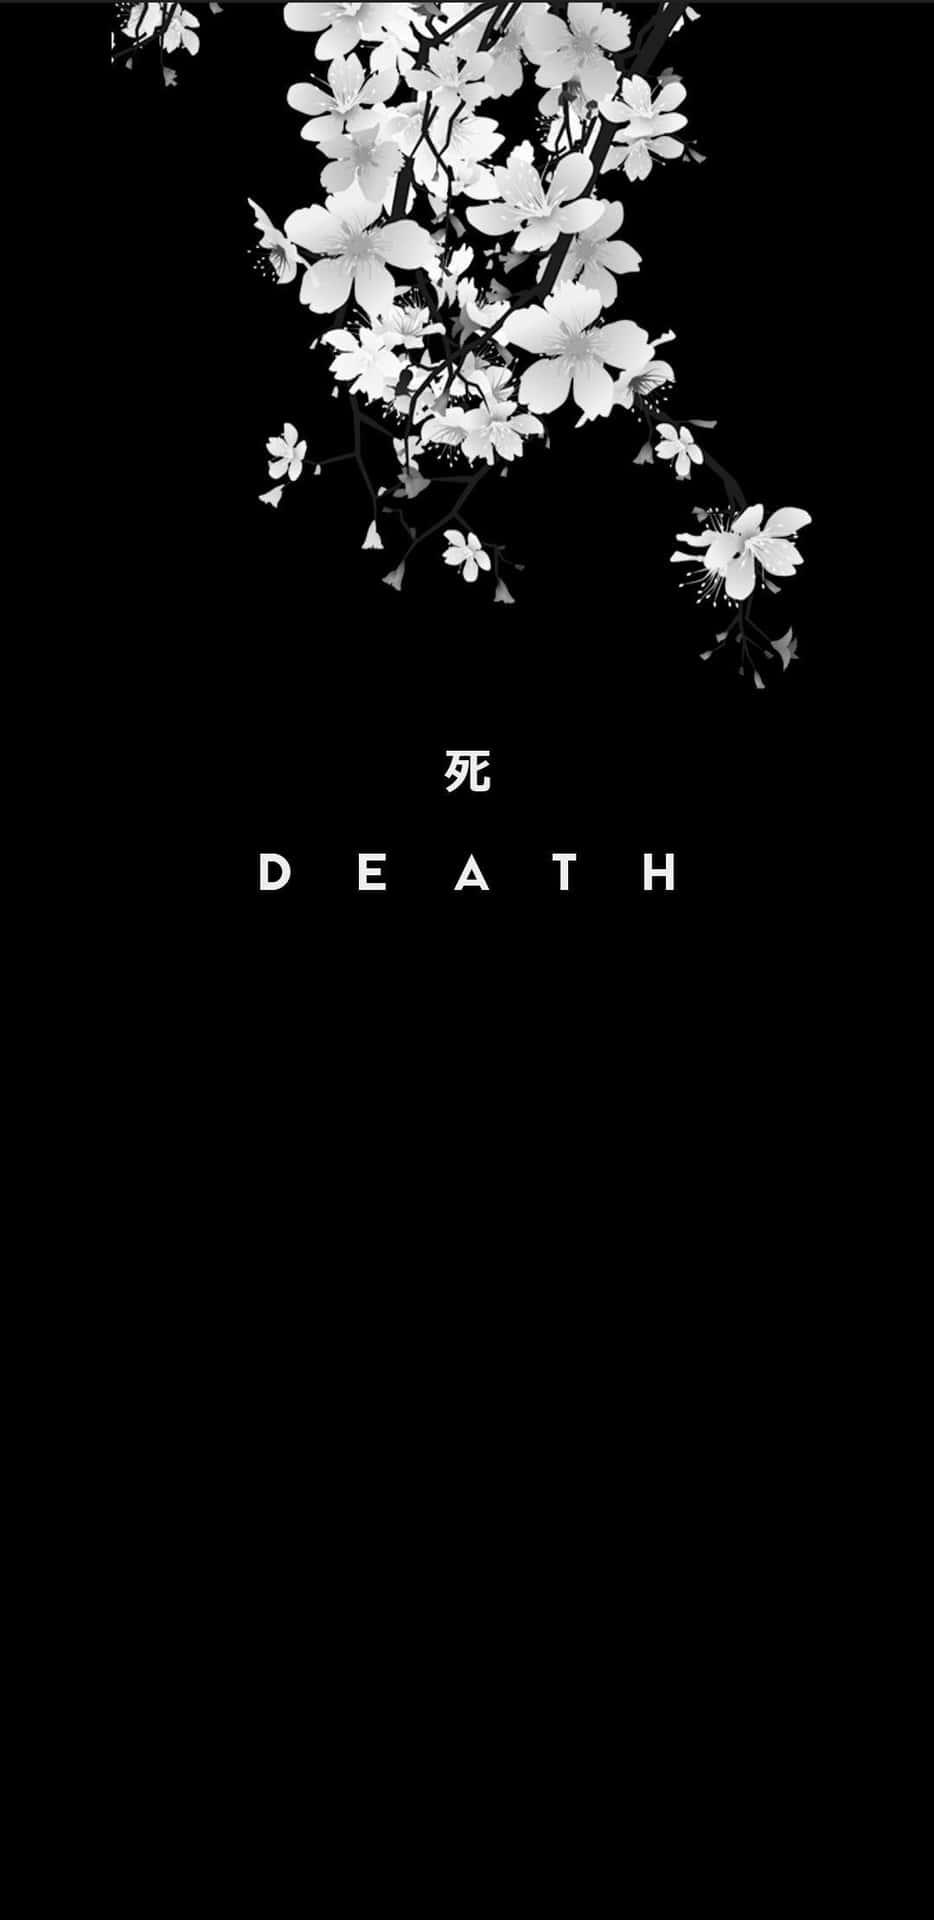 Death - A Black And White Poster With The Word Death Wallpaper